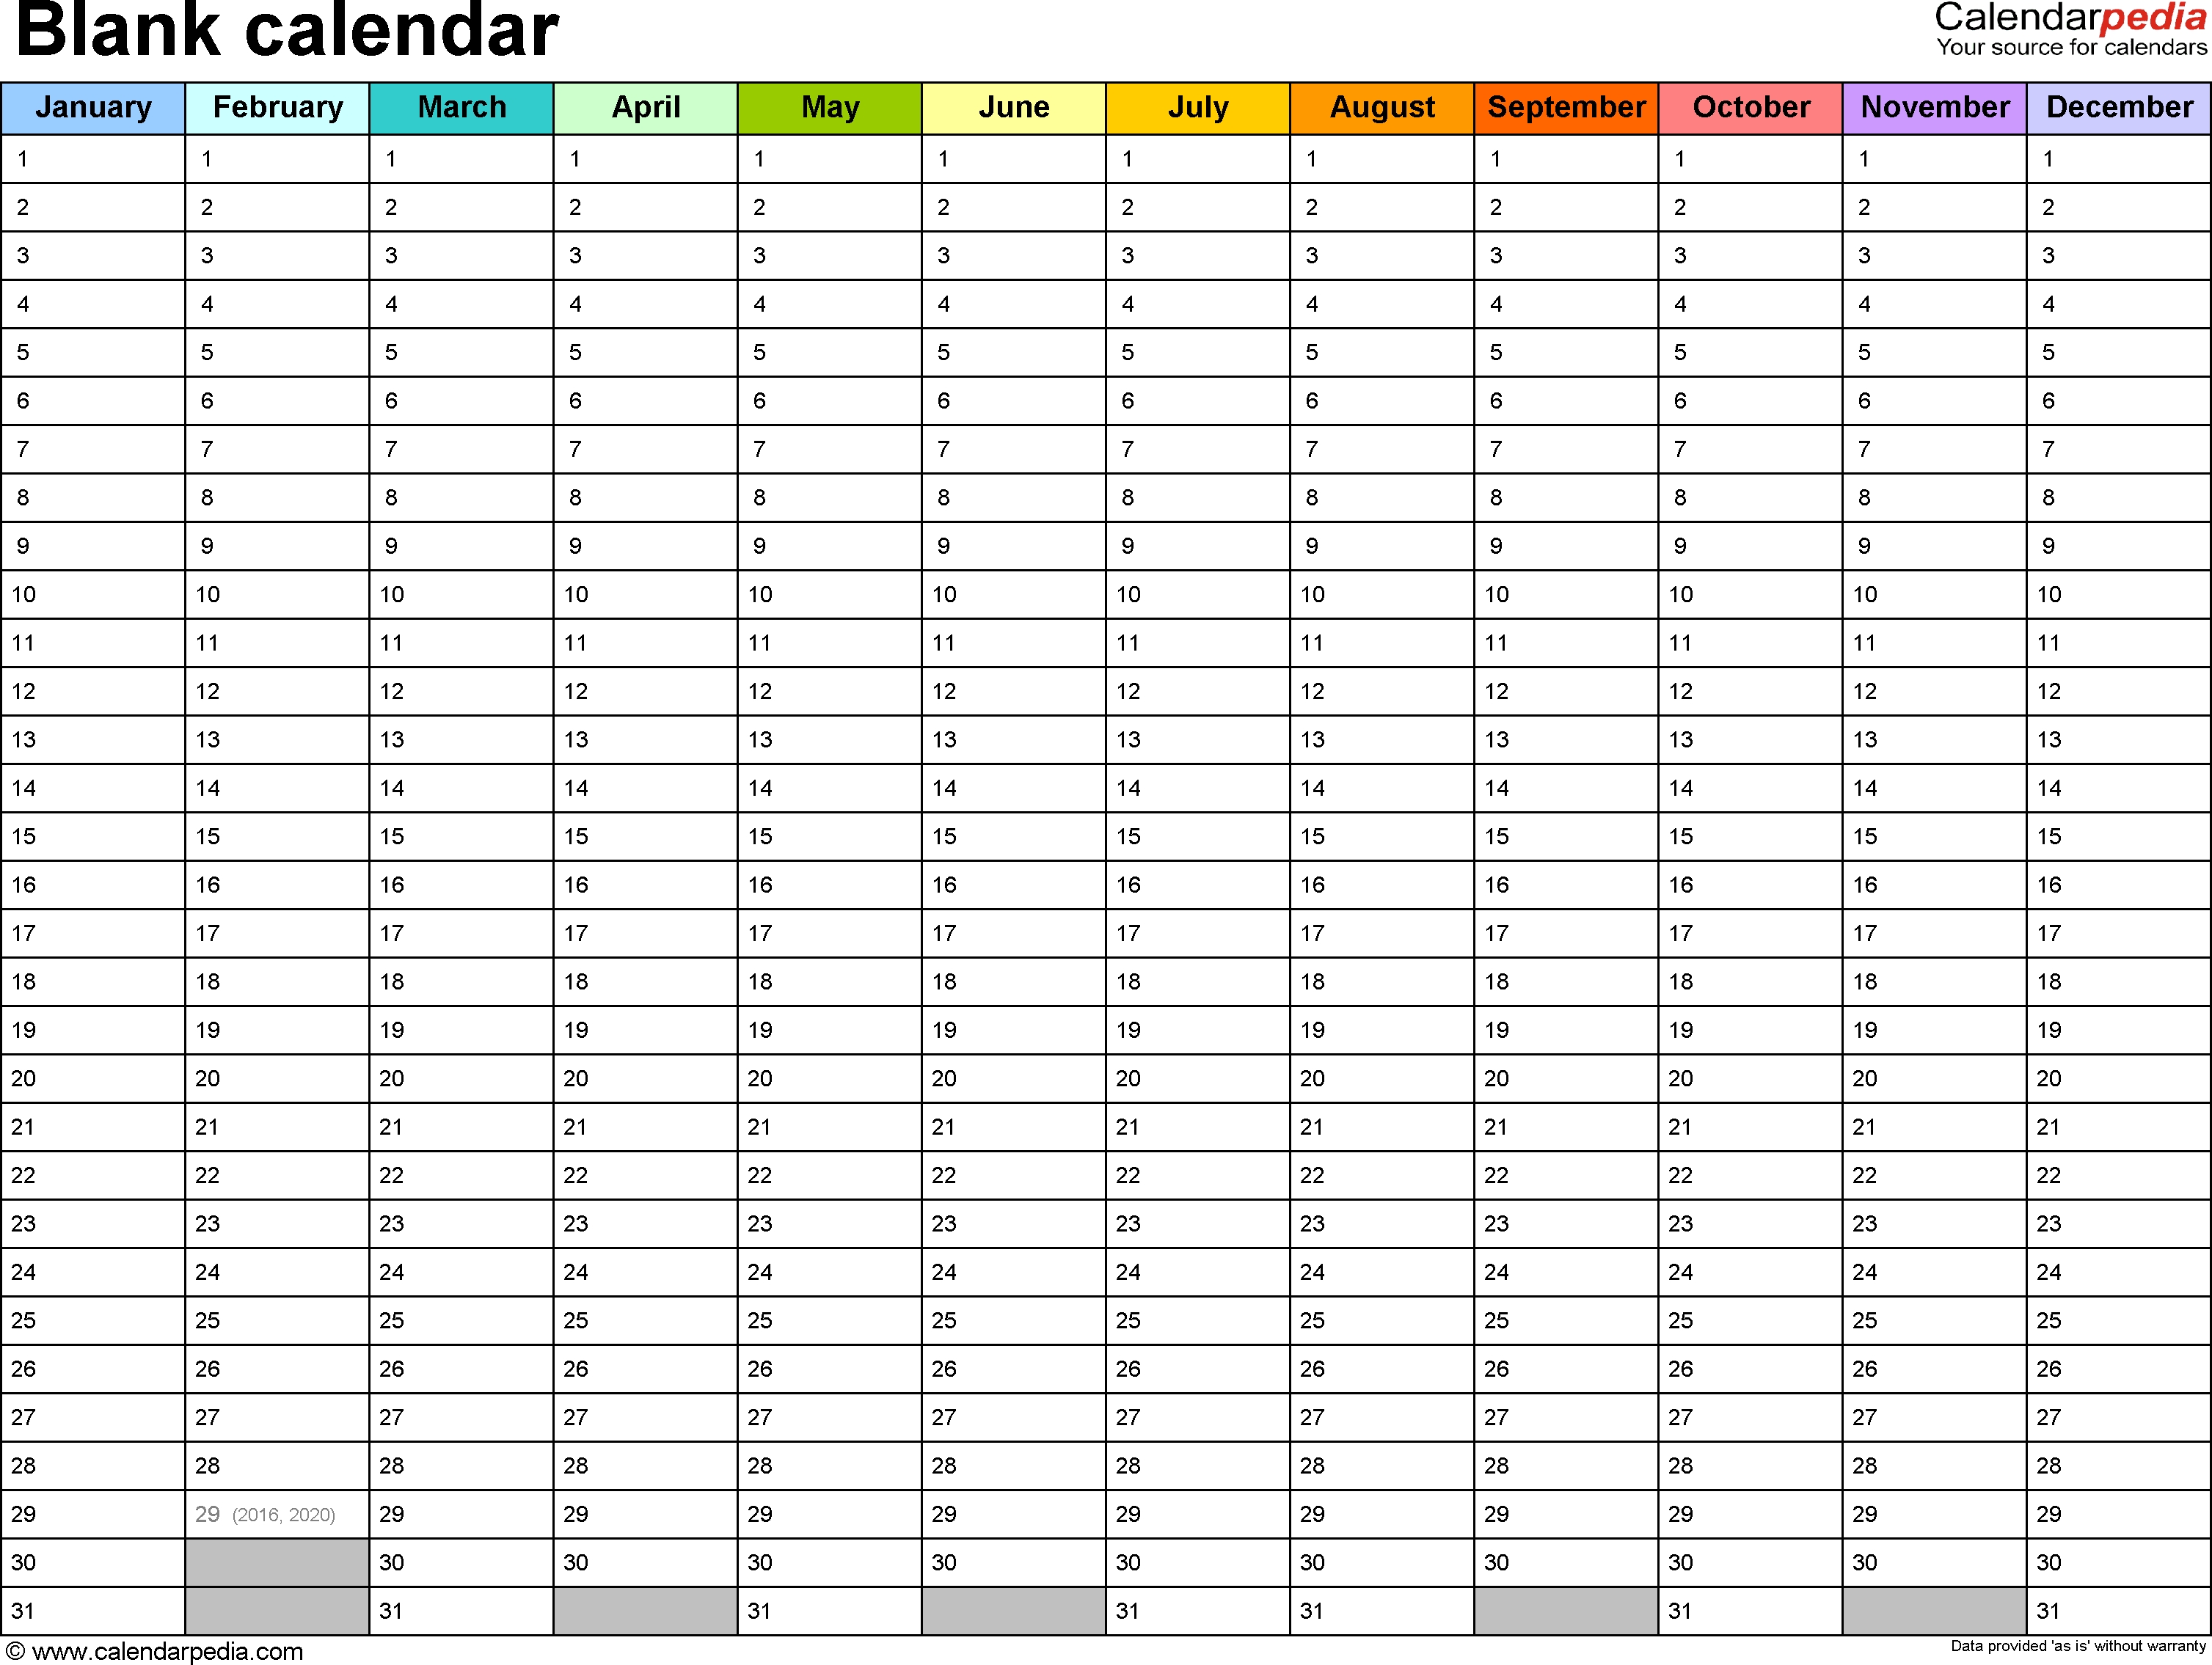 Blank Calendar - 9 Free Printable Microsoft Word Templates Monthly Calendar On One Page